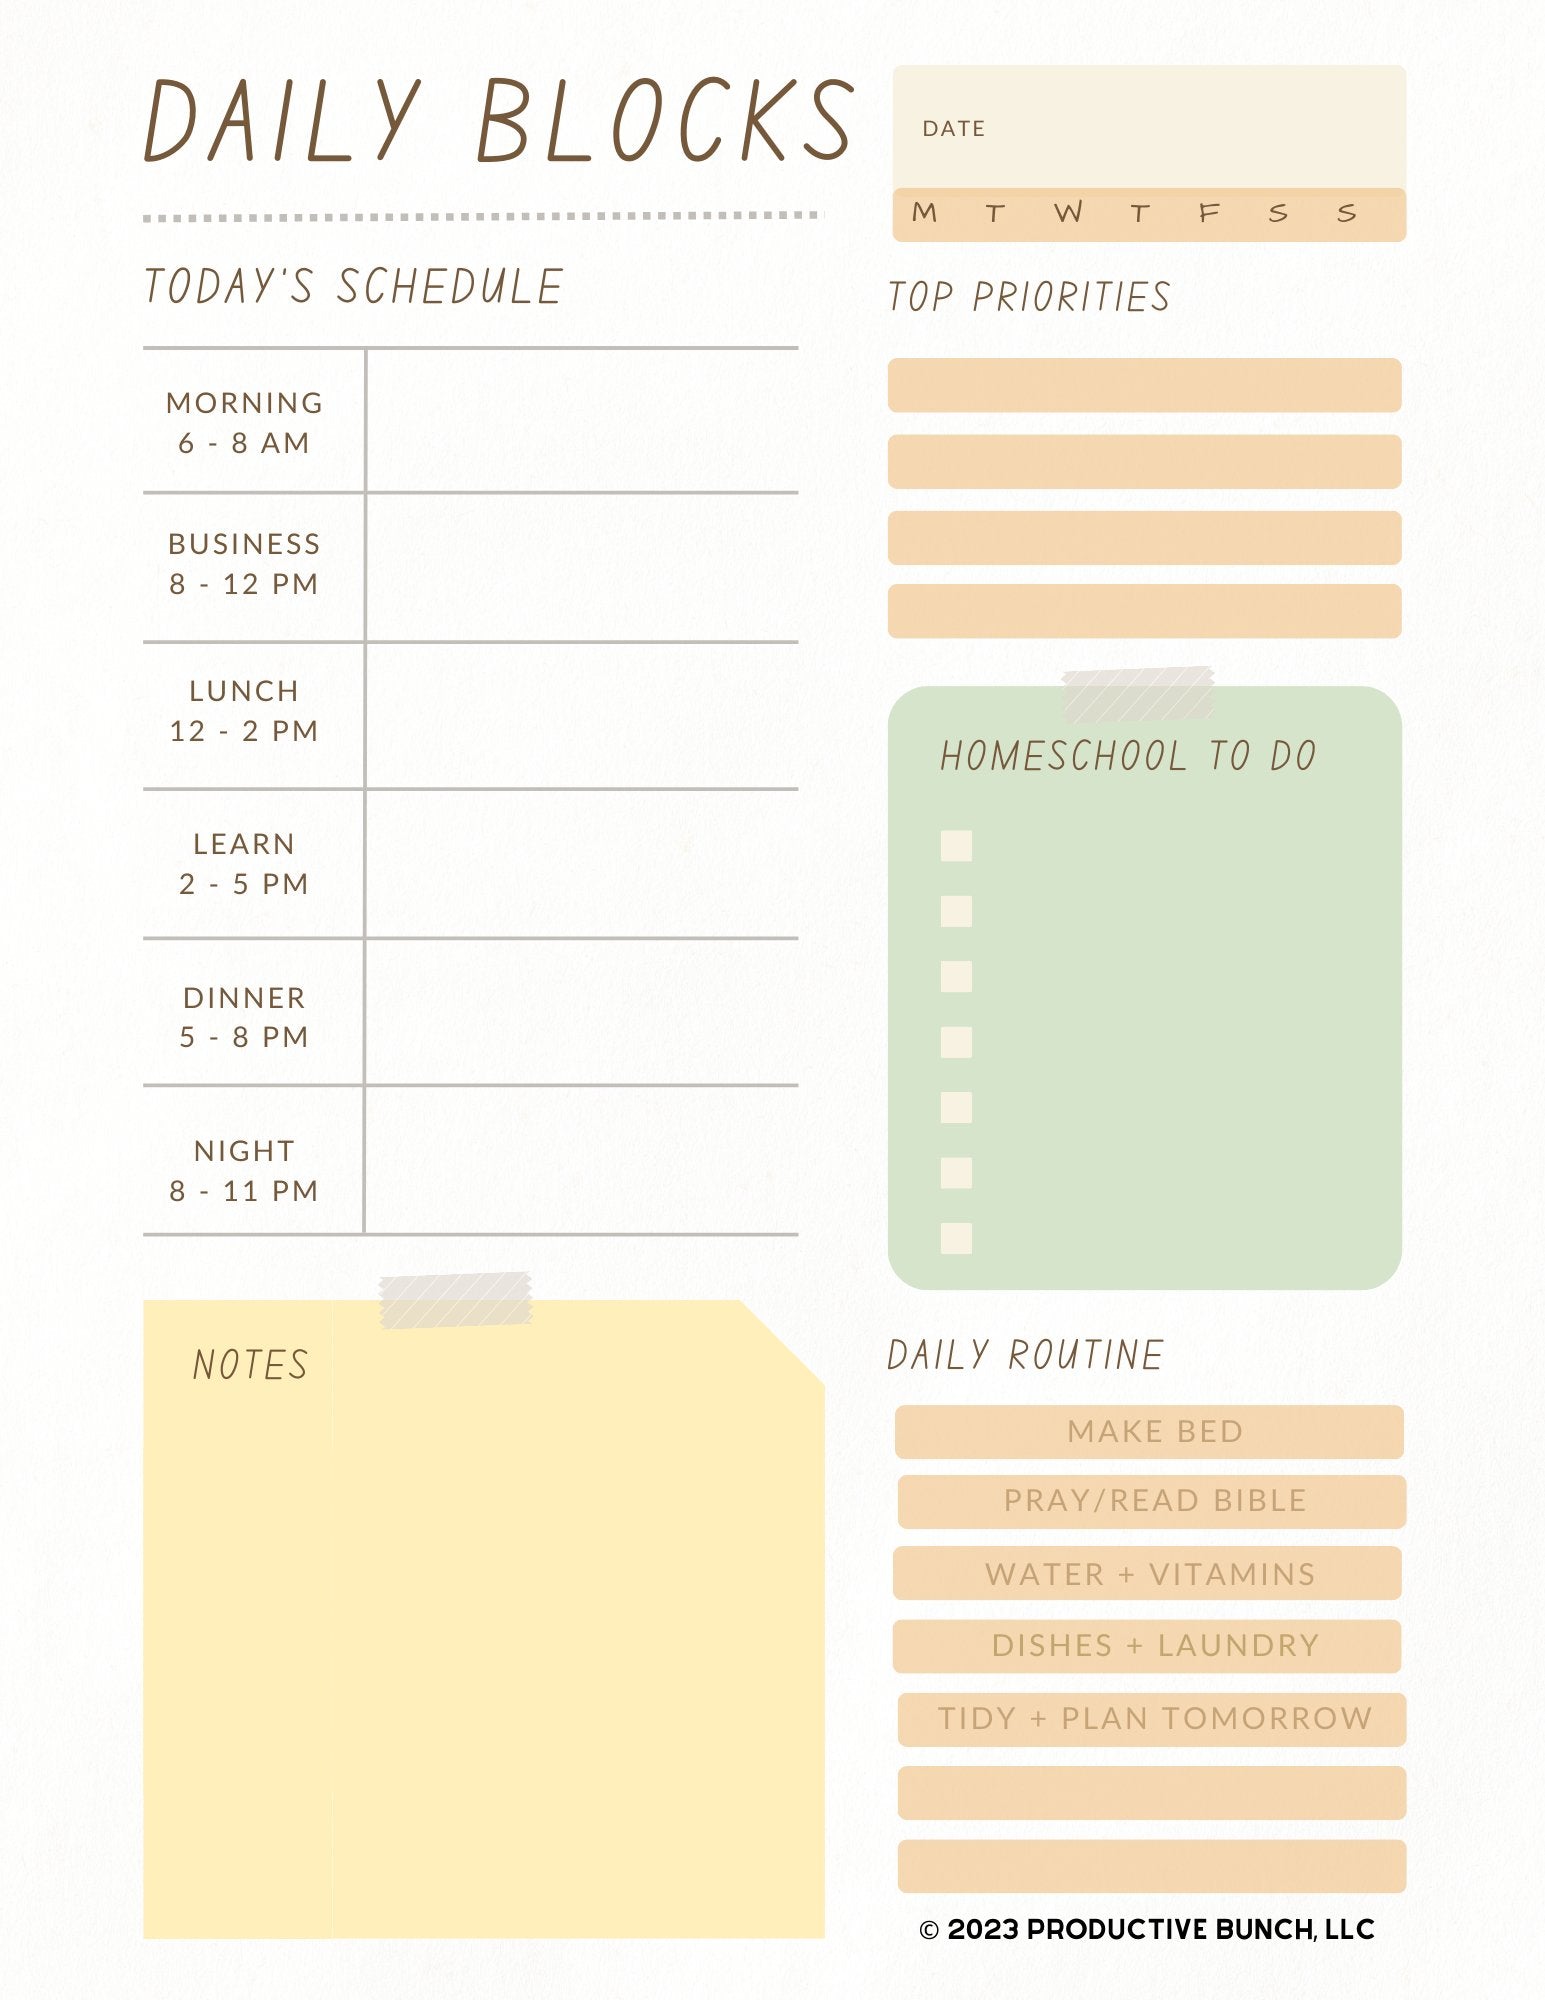 Optimize homeschooling with a daily block schedule pad homeschool edition. Stay organized!